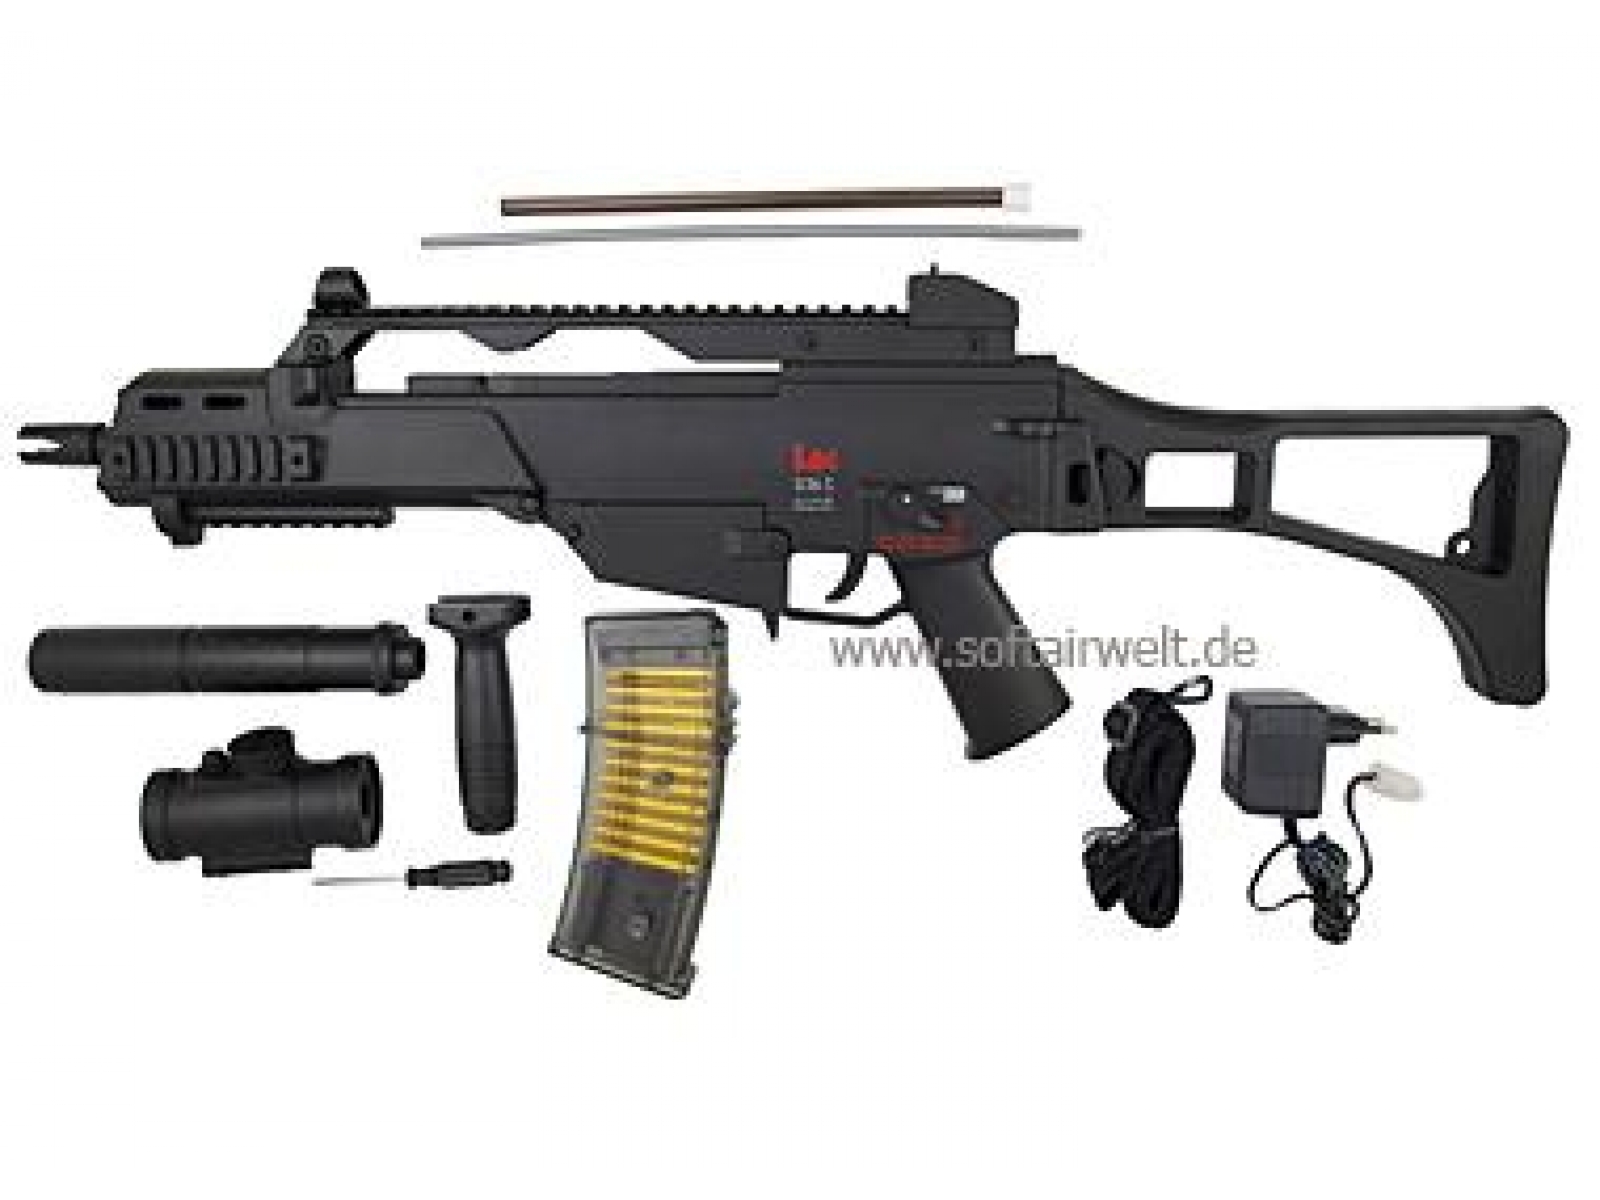 Heckler & Koch G36 Pics, Weapons Collection